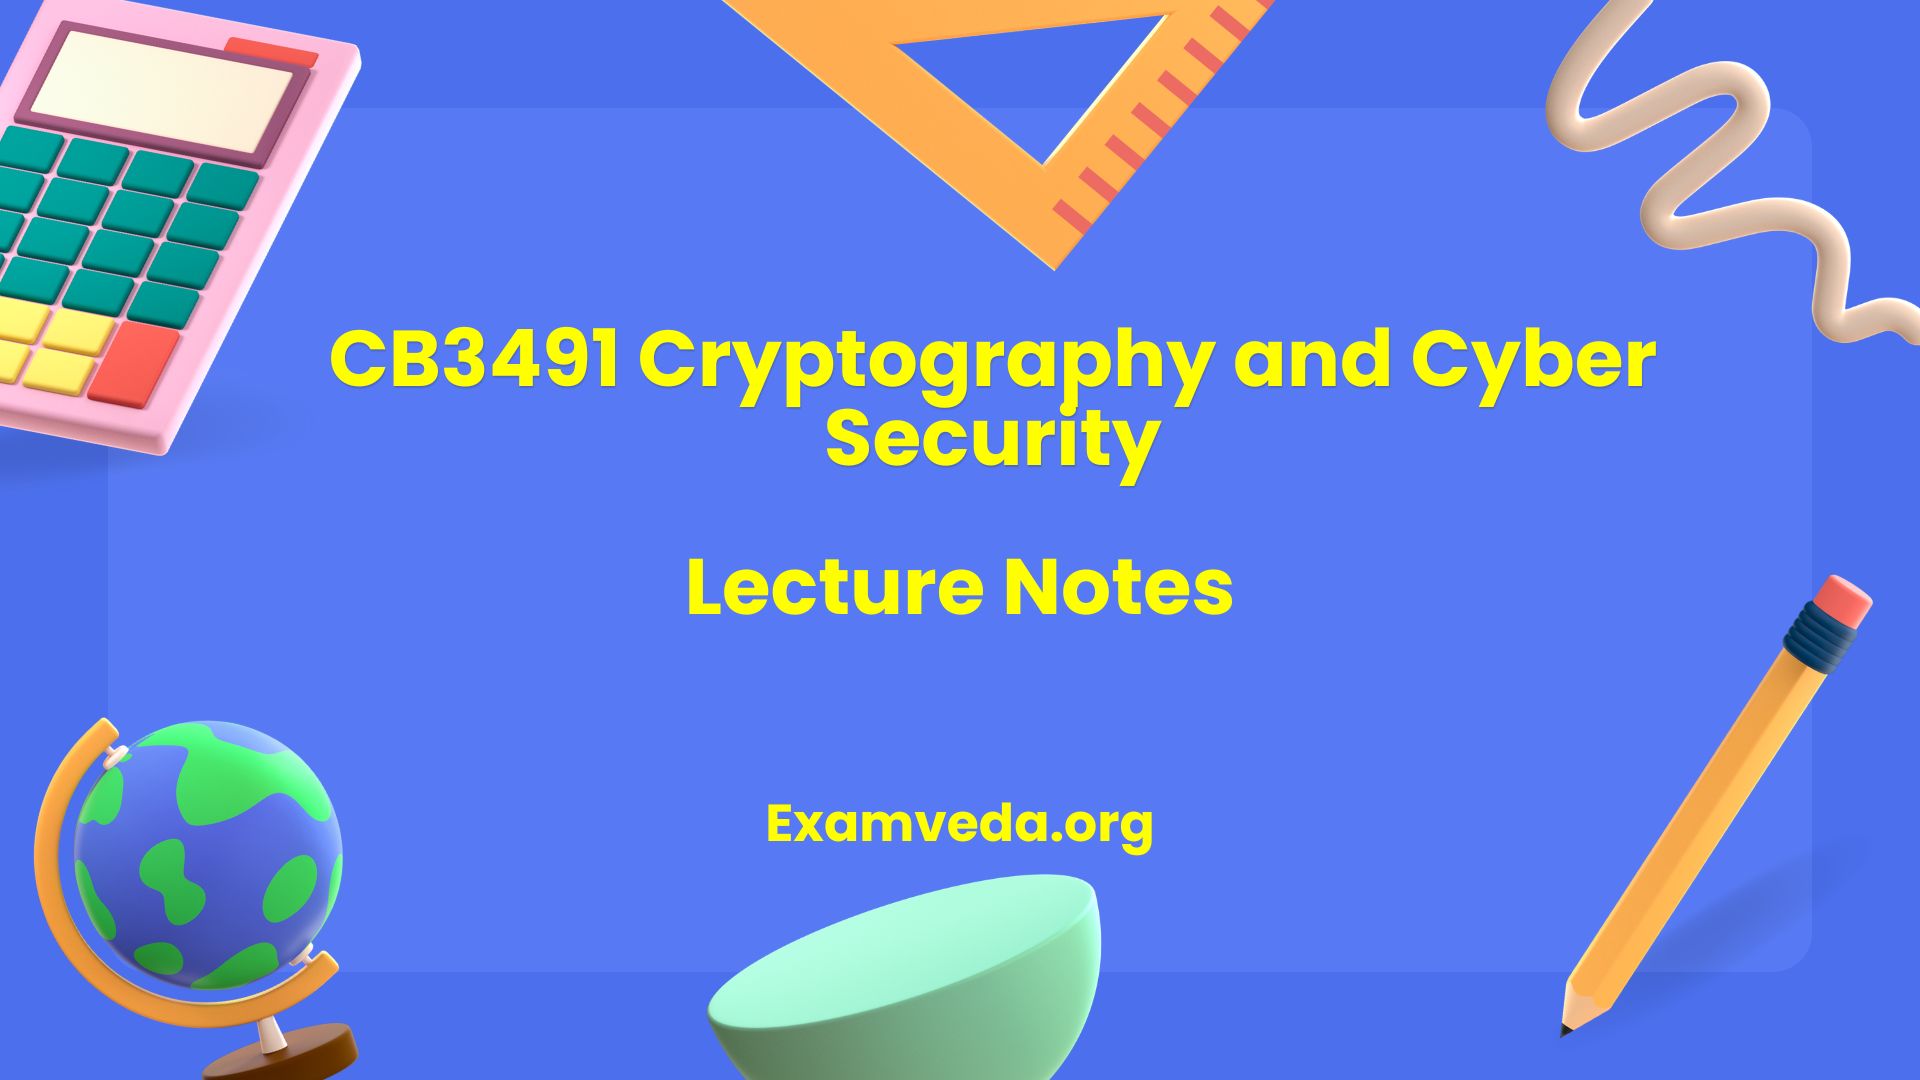 CB3491 Cryptography and Cyber Security Lecture Notes